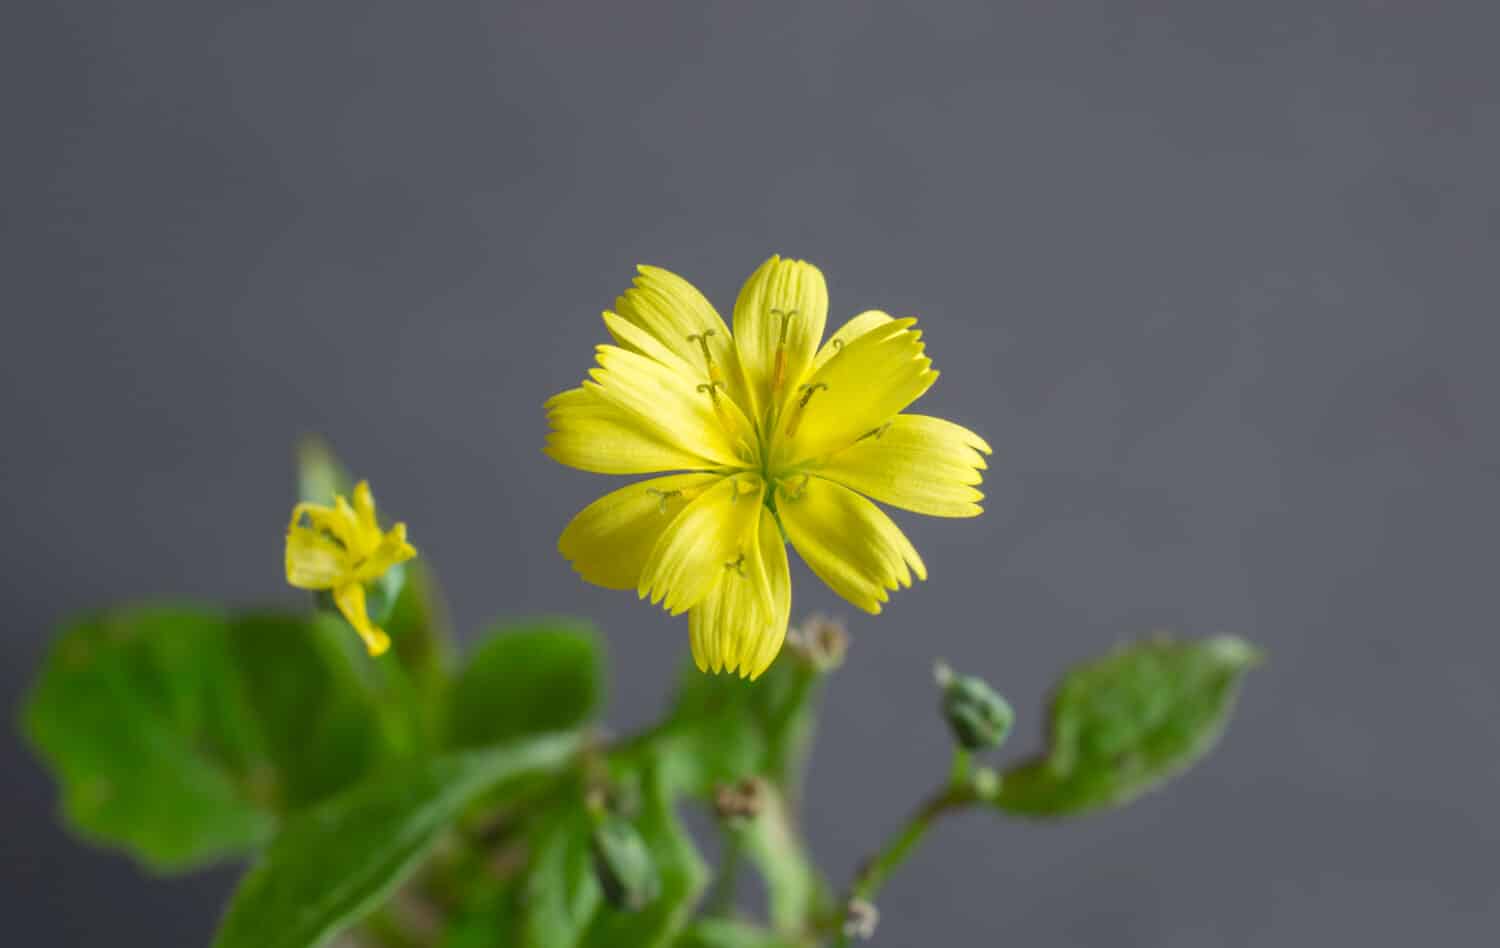 A Crowsfoot flower found in a sheltered valley in early March in France.